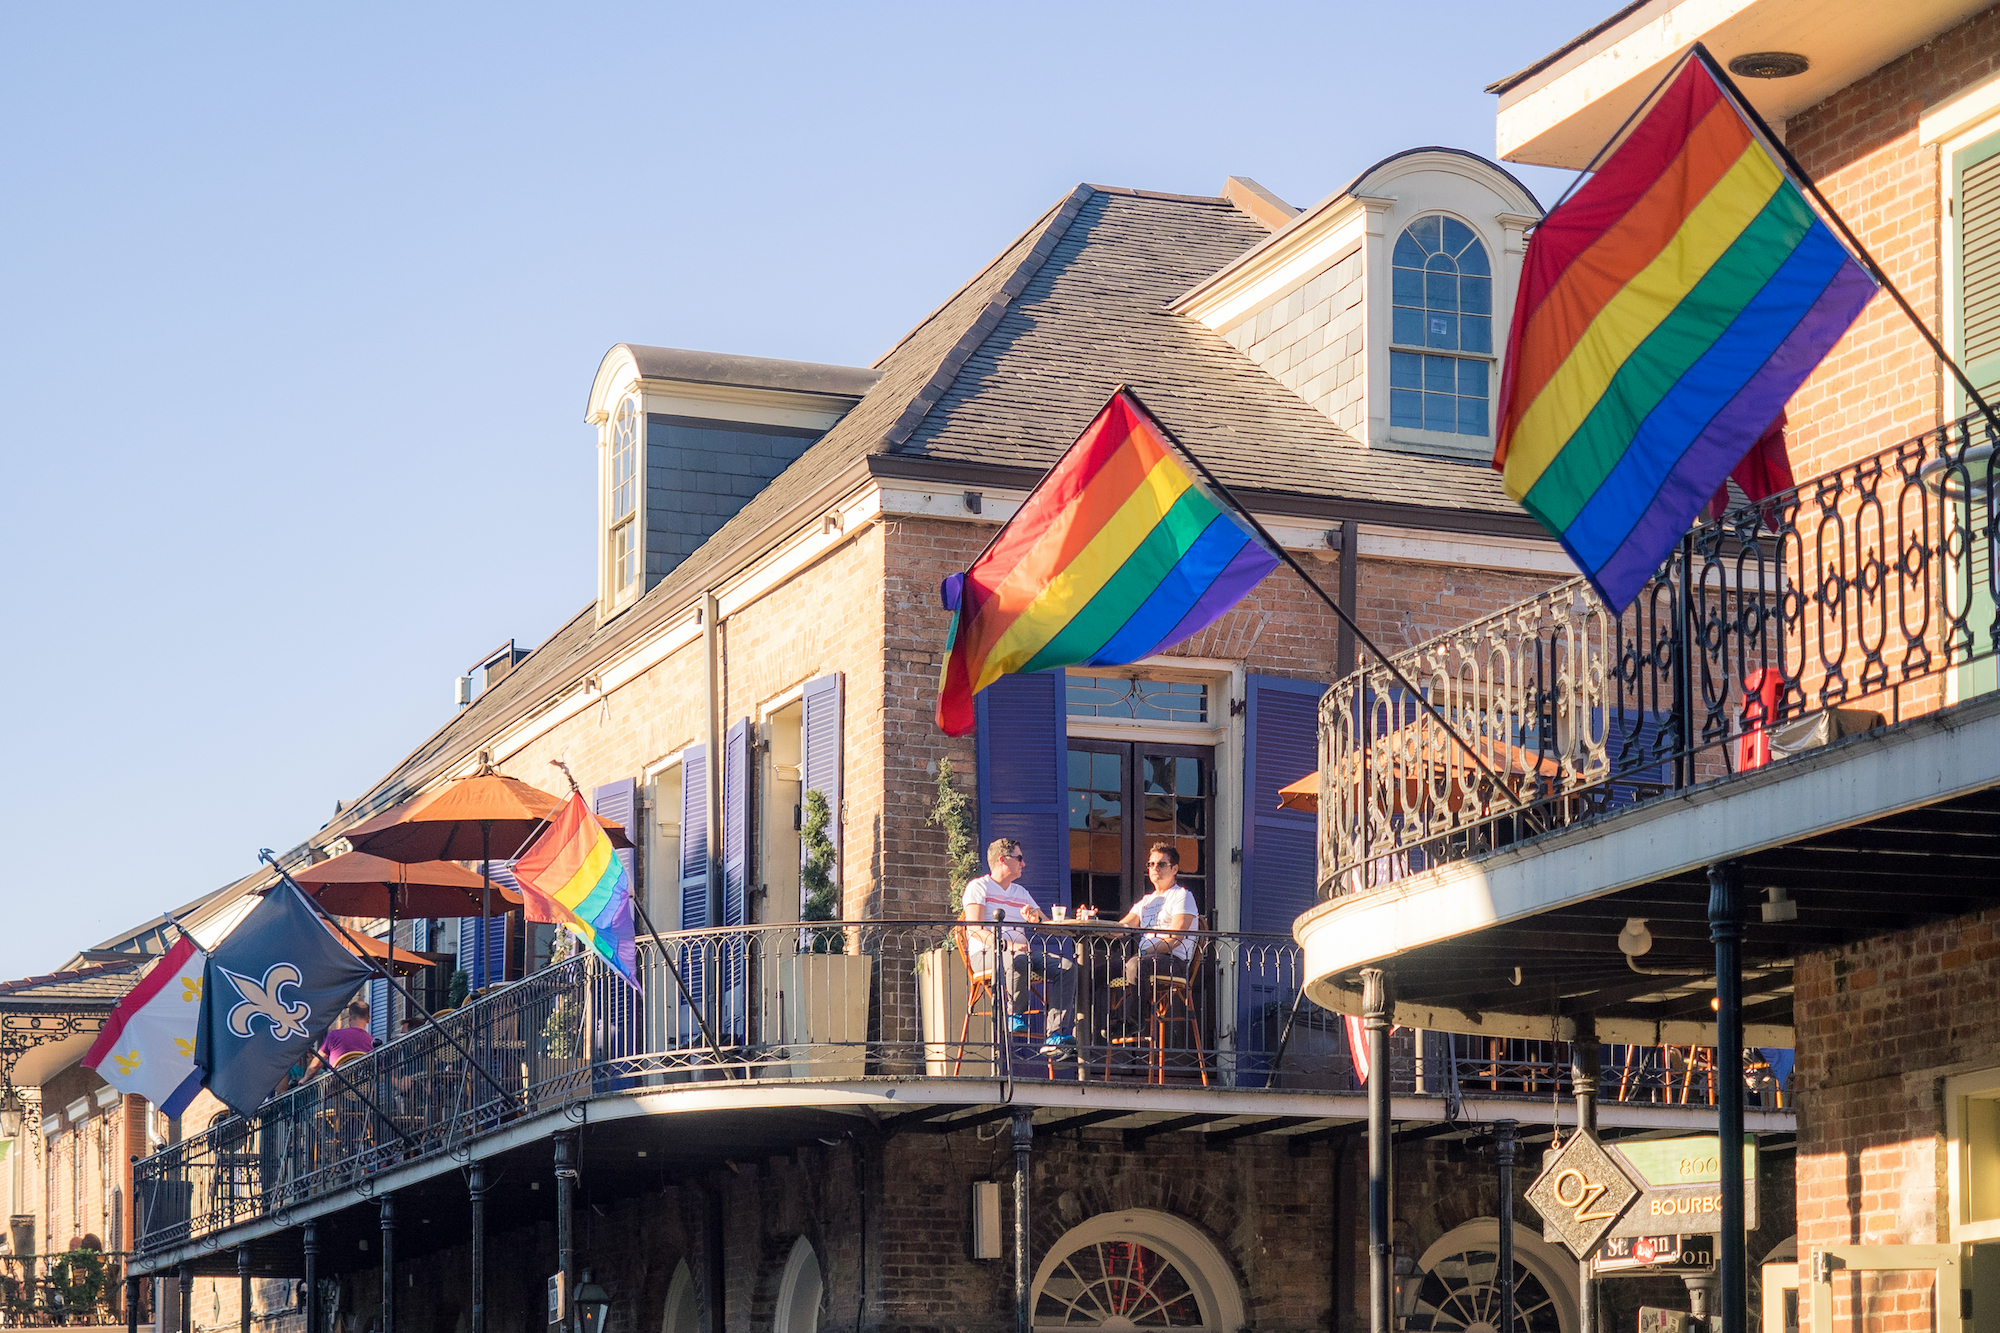 Two building terraces in the French Quarter wave pride flags.